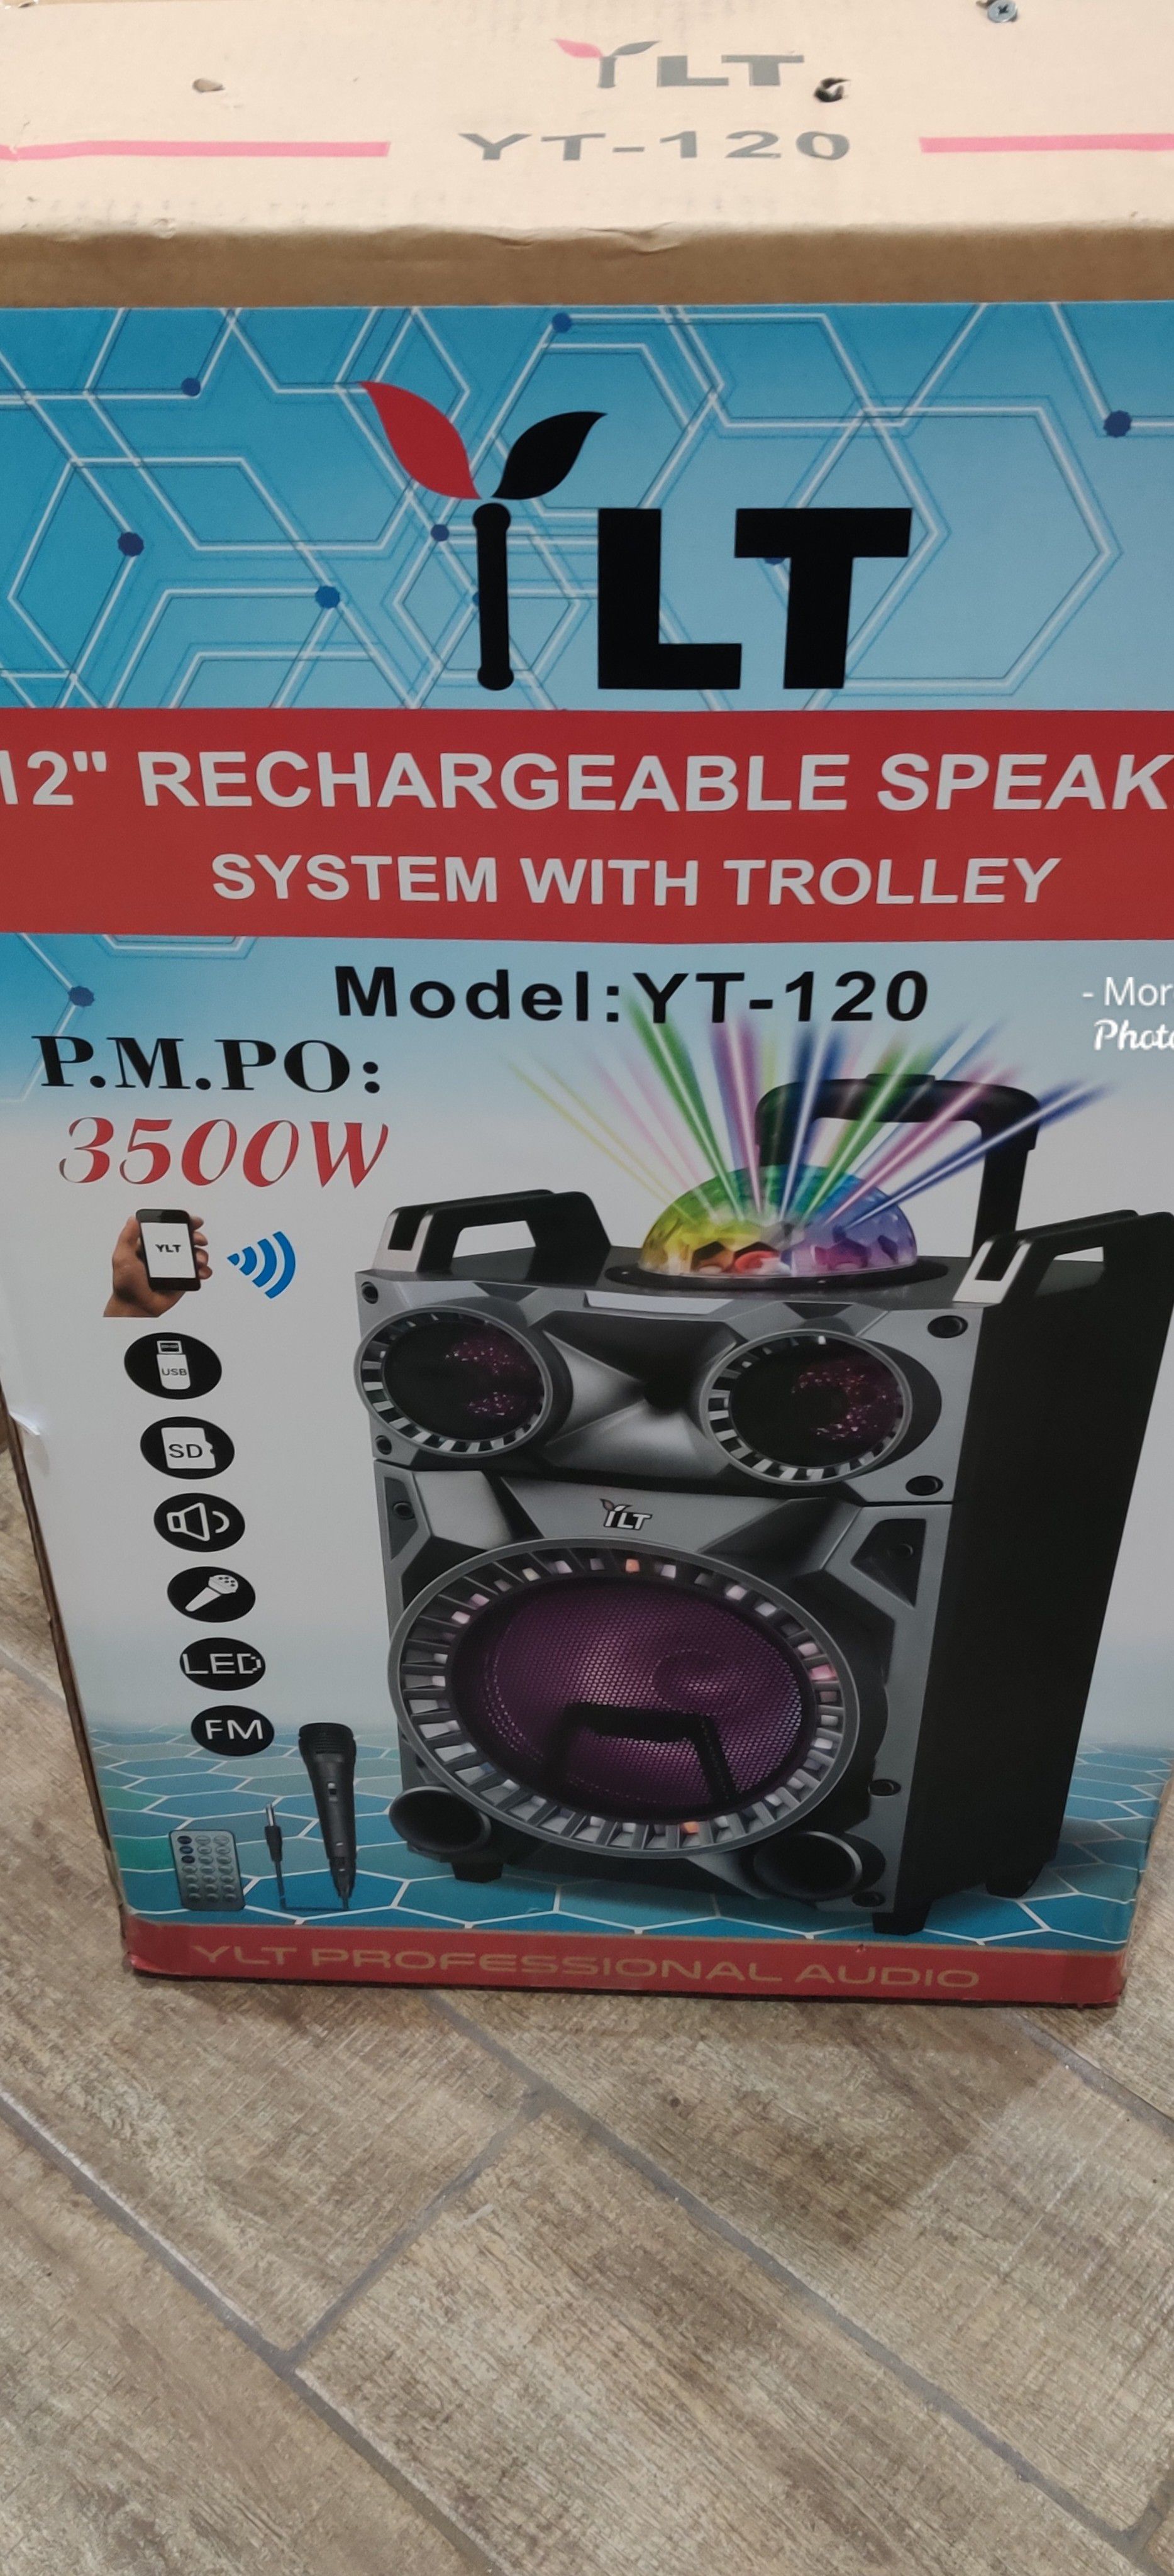 12 INCH RECHARGEABLE SPEAKER SYSTEM WITH TROLLEY NEW